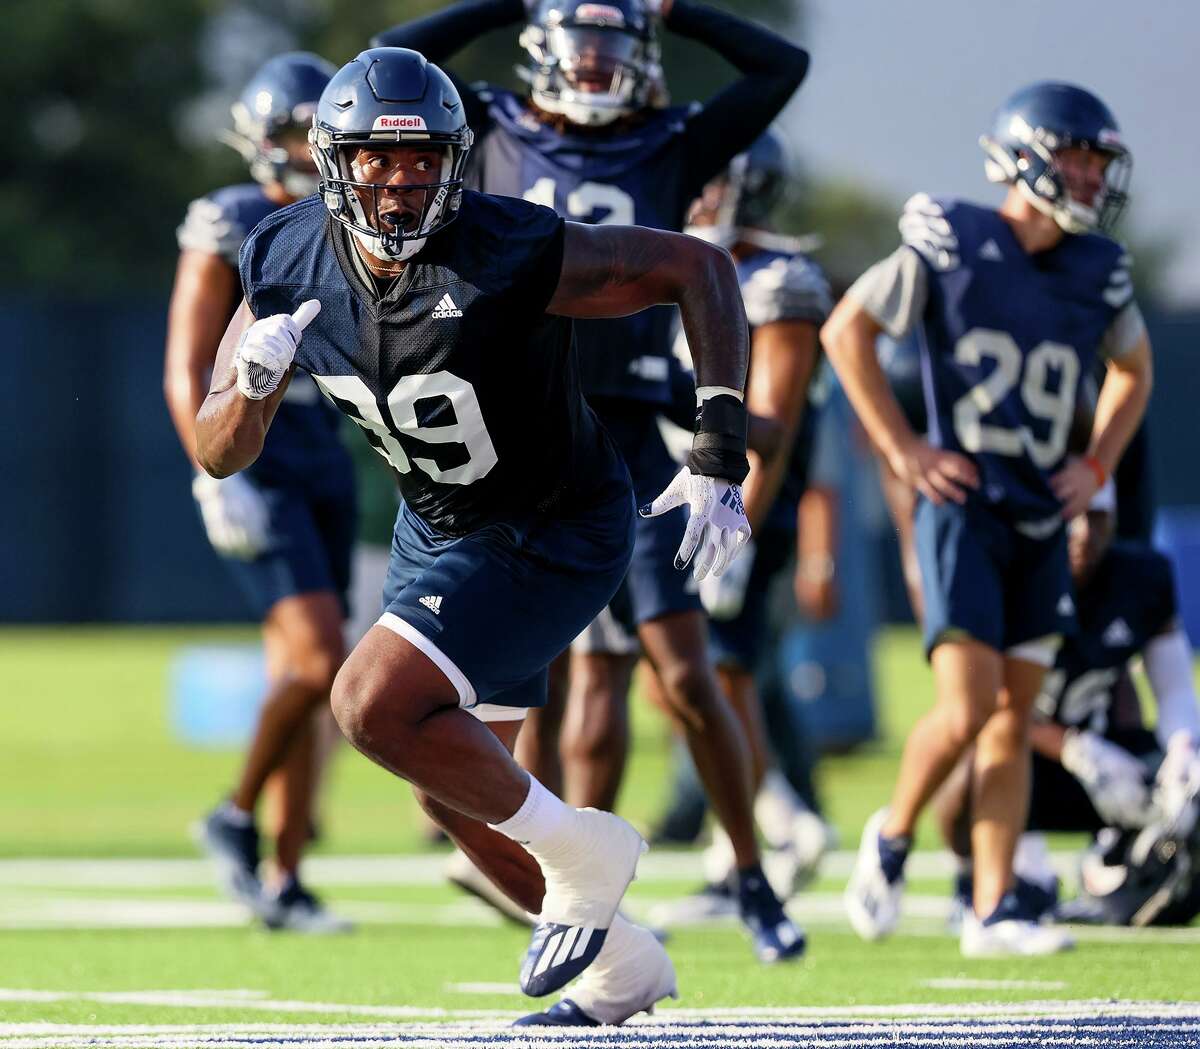 UTSA tight end Leroy Watson runs a route during passing drills in their first football practice of fall camp at the practice fields of the RACE facility on campus on Friday, Aug. 6, 2021.